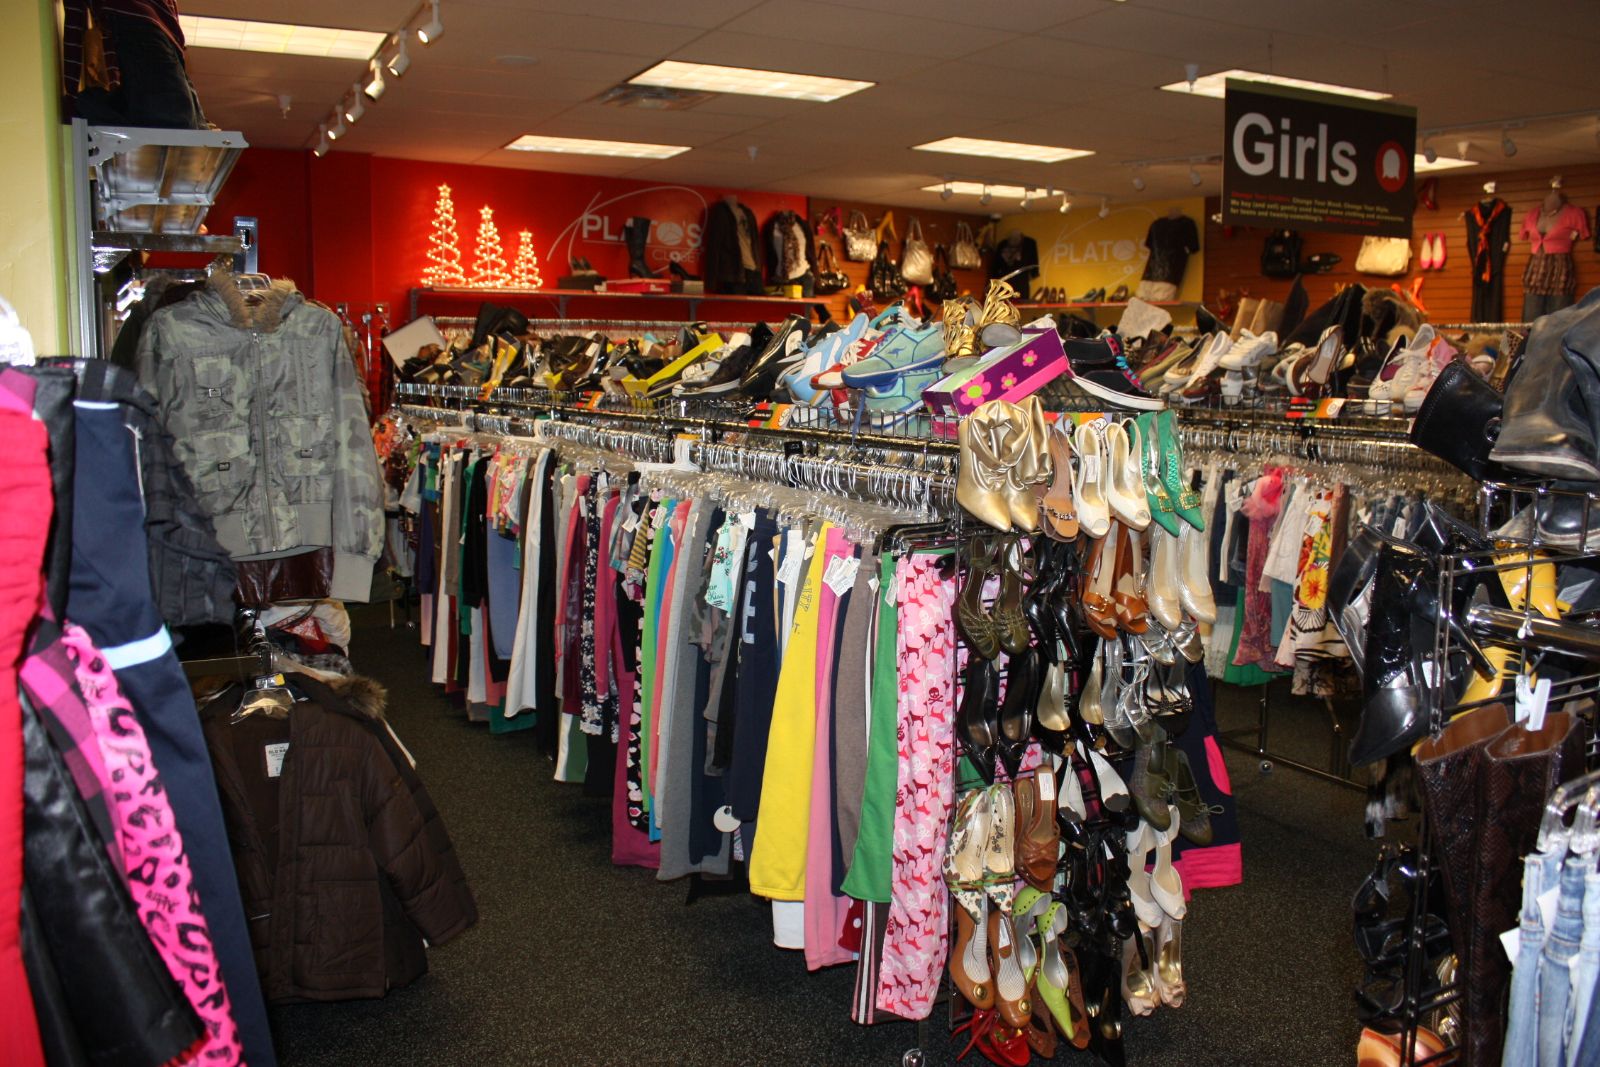 Resale stores like Plato's Closet, Once Upon A Child gaining